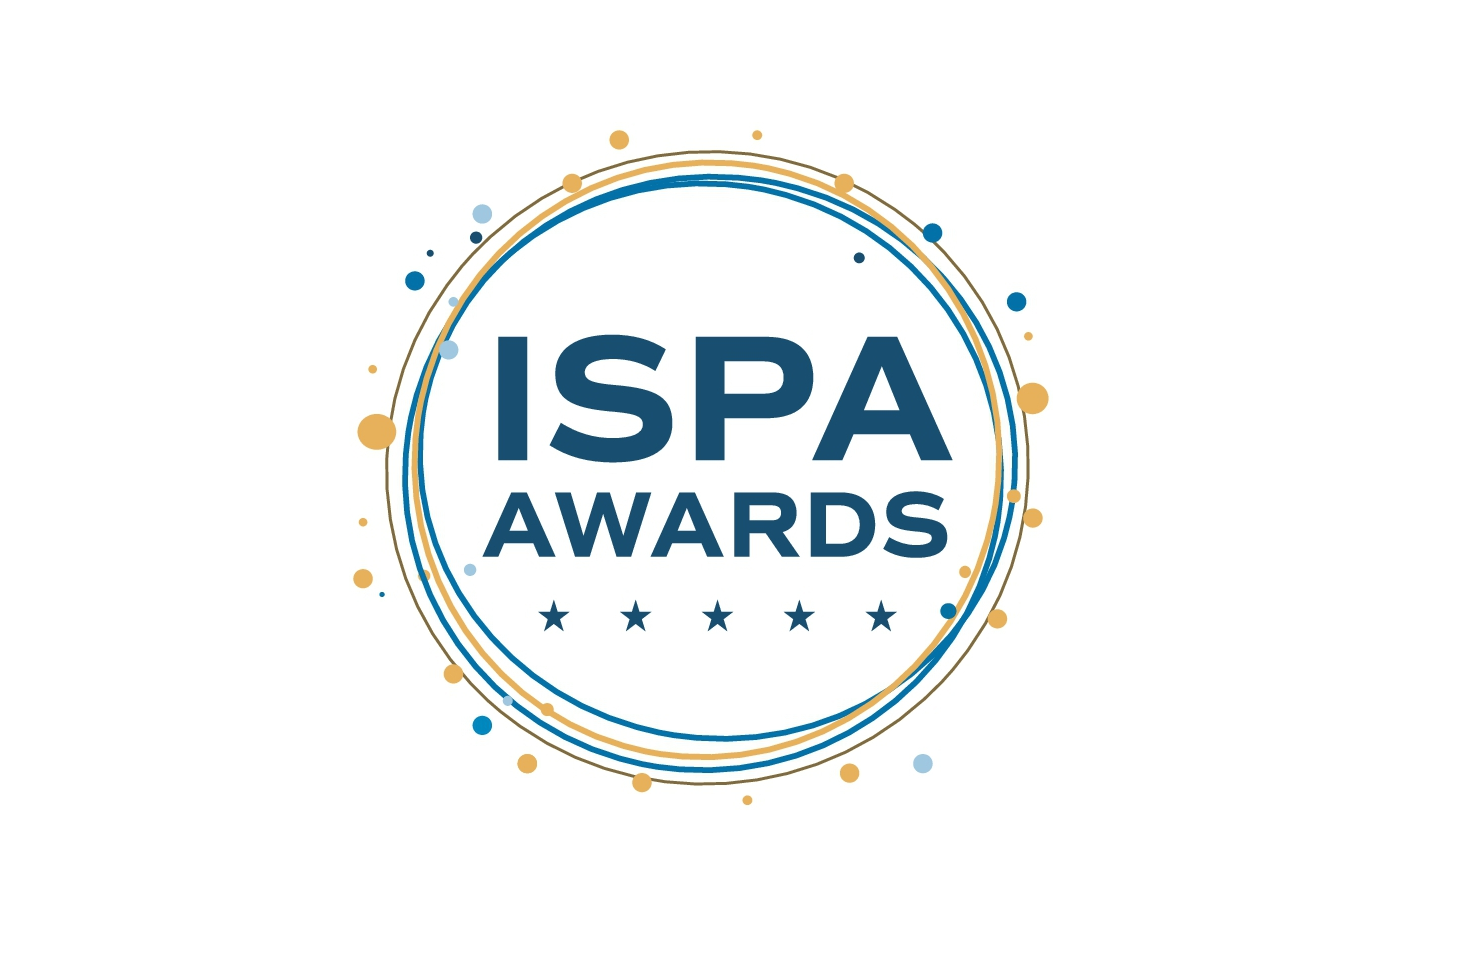 Storm Internet shortlisted in three categories for 2019 ISPAs